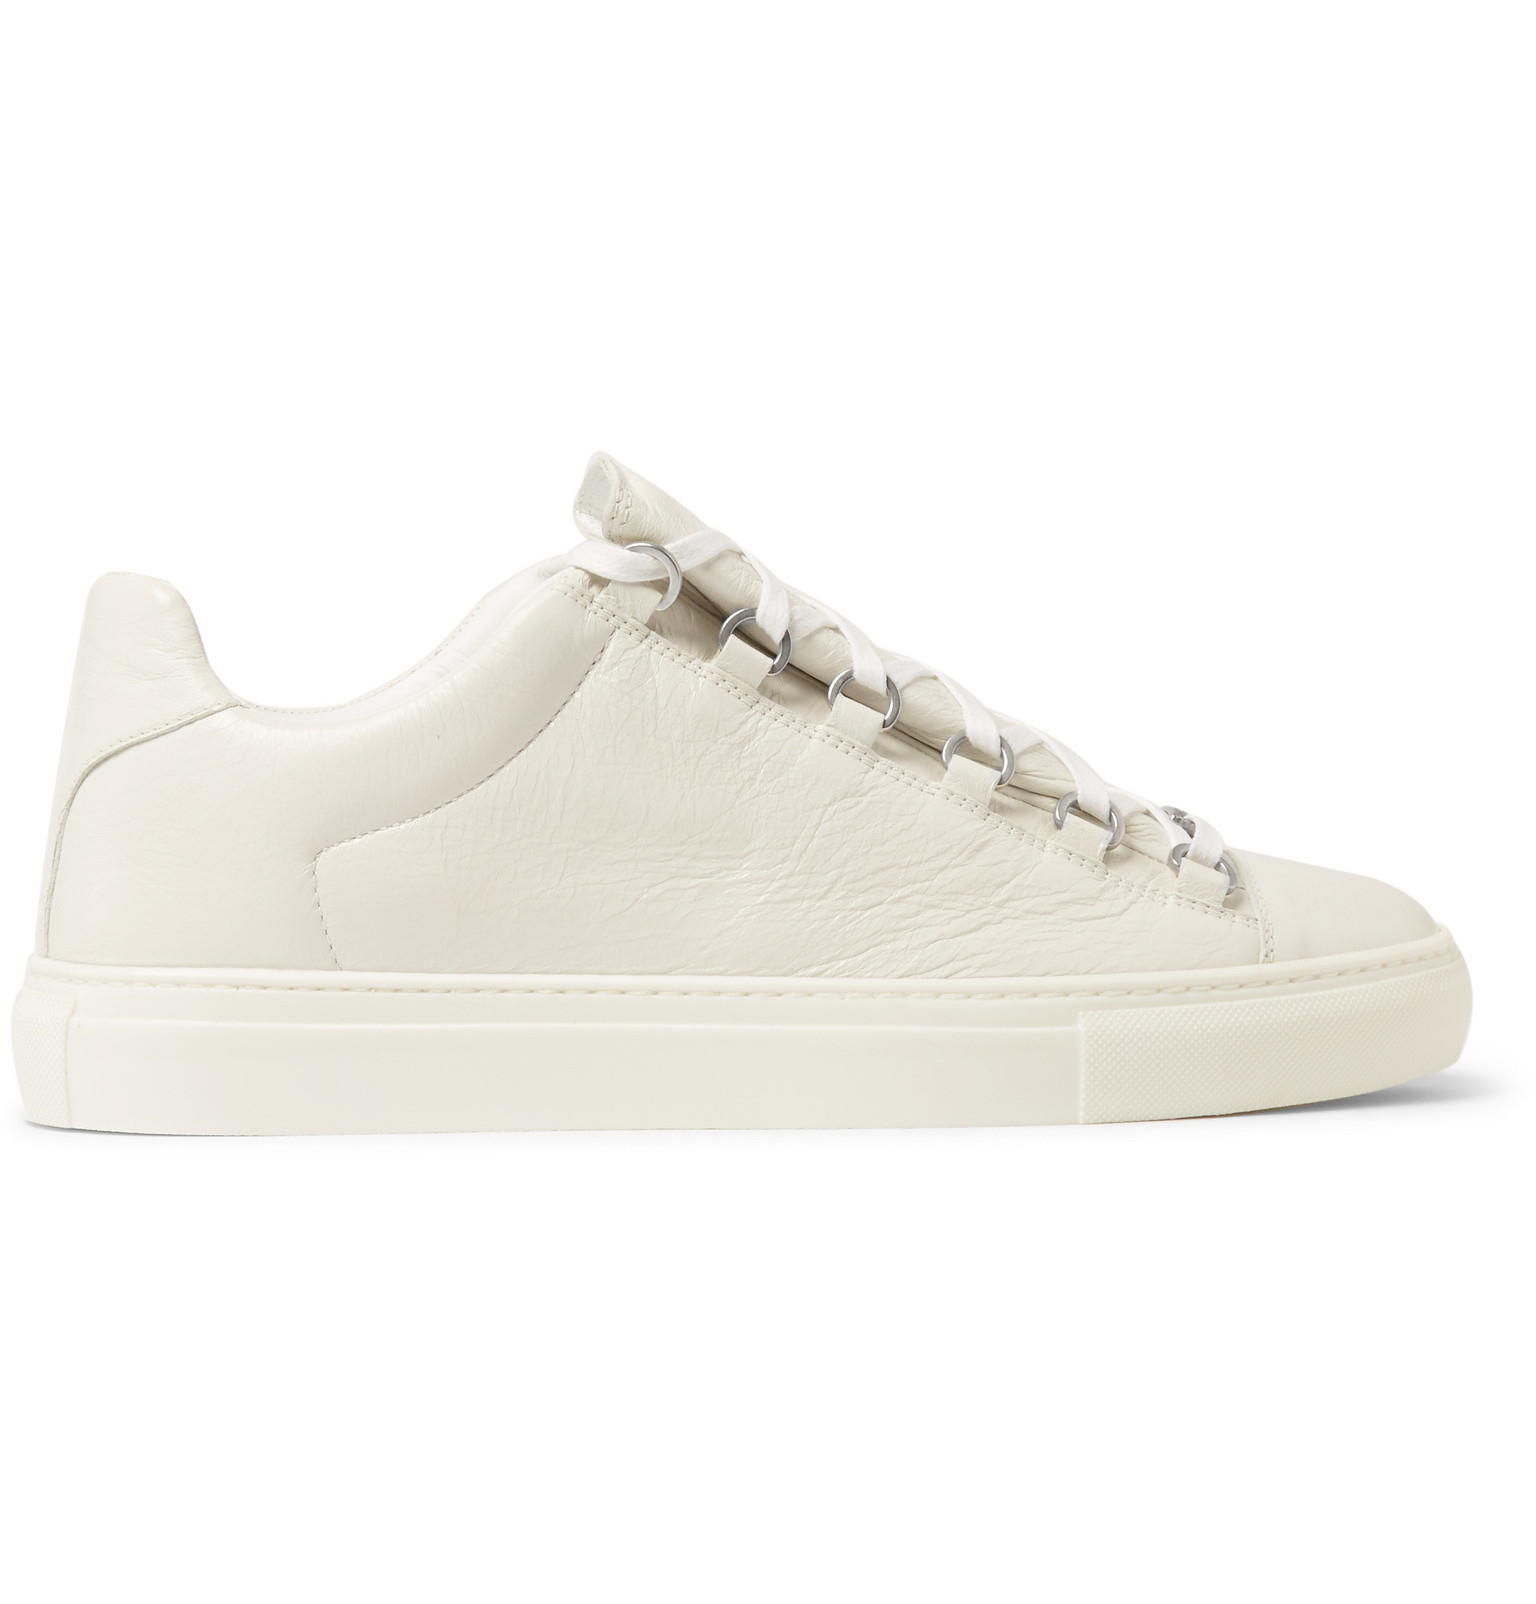 Balenciaga Arena Low-top Leather Trainers in White for Men - Lyst